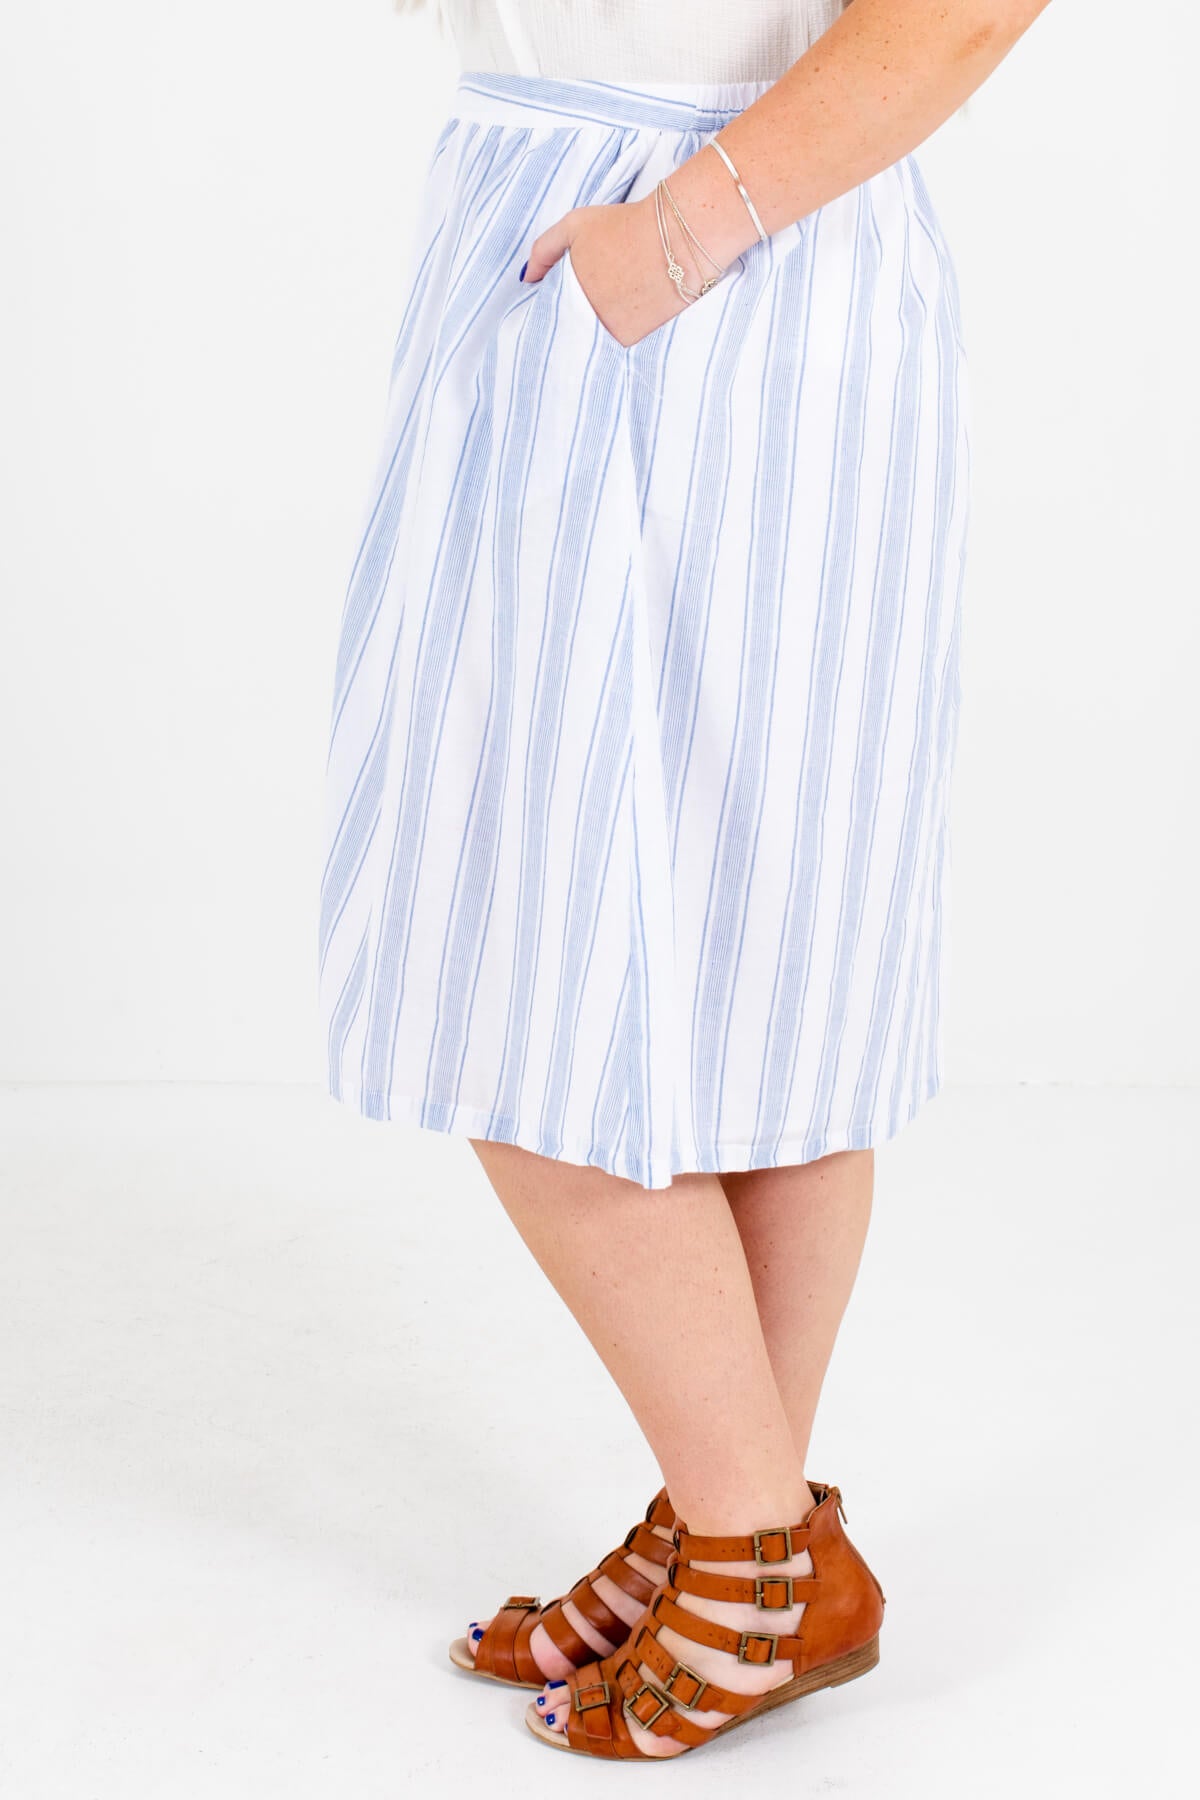 White and Blue Button-Up Front Plus Size Boutique Midi Skirts for Women